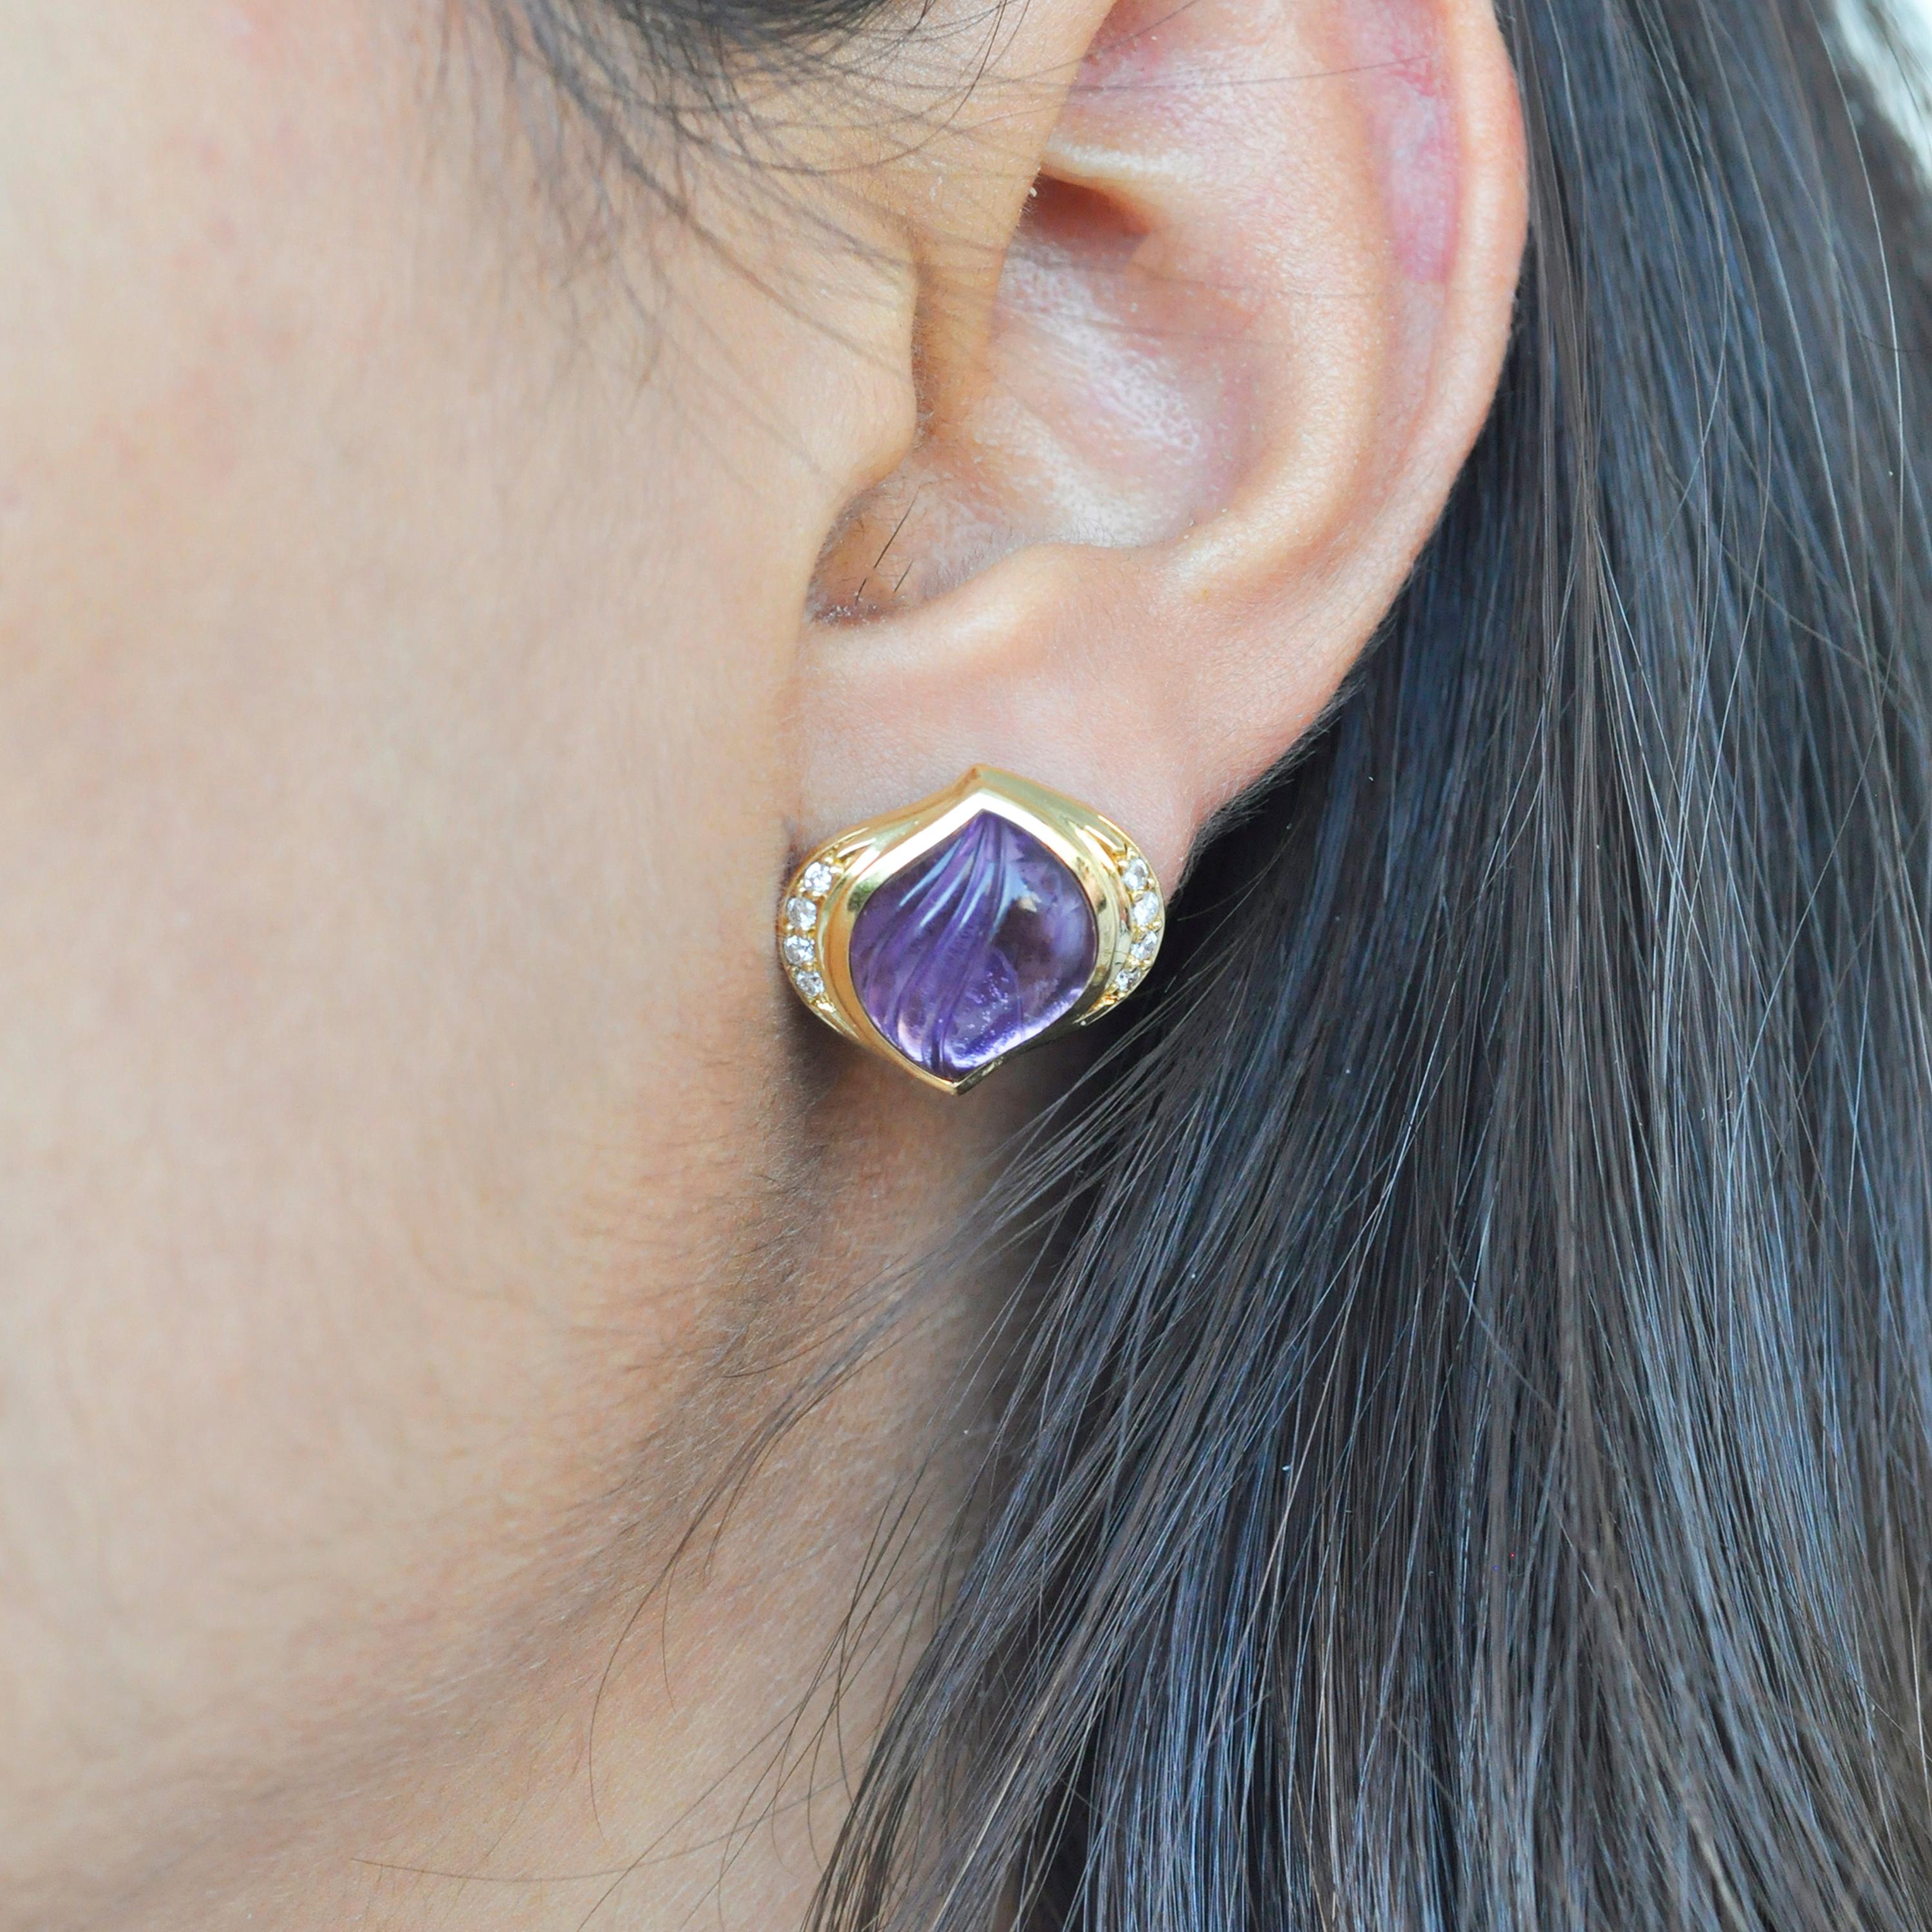 18 karat gold natural amethyst carving diamond stud earrings

A beautiful classic yet unique amethyst carving stud earring is a chic piece to have in your jewelry closet. The earrings uses 18 karat yellow gold with diamonds and amethyst carving